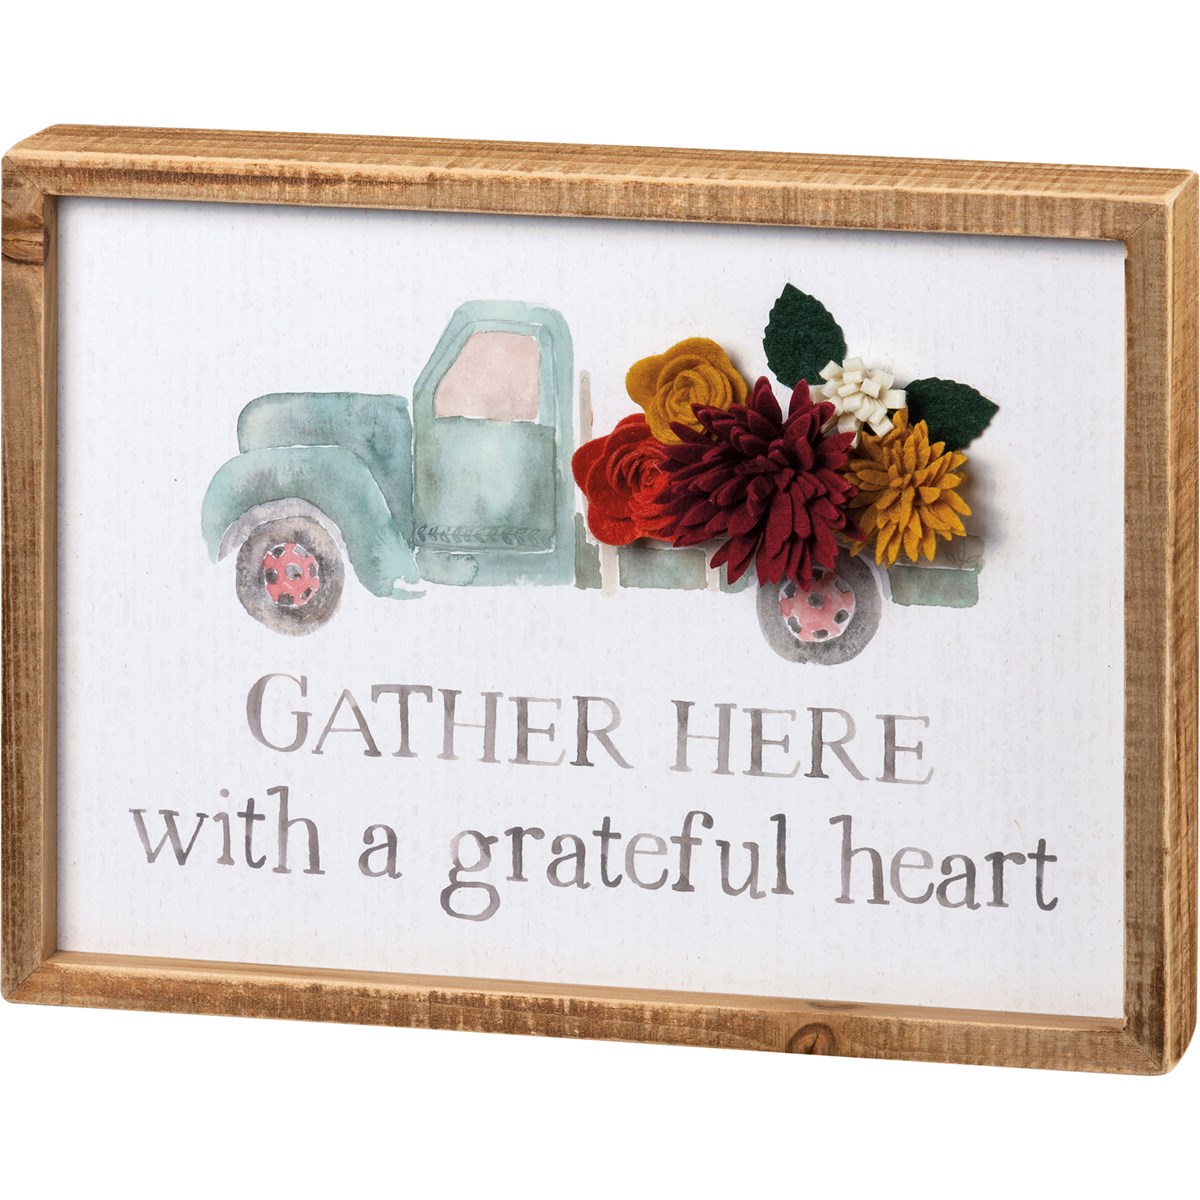 Gather Here With A Grateful Heart Inset Box Sign - Wood, Paper, Felt